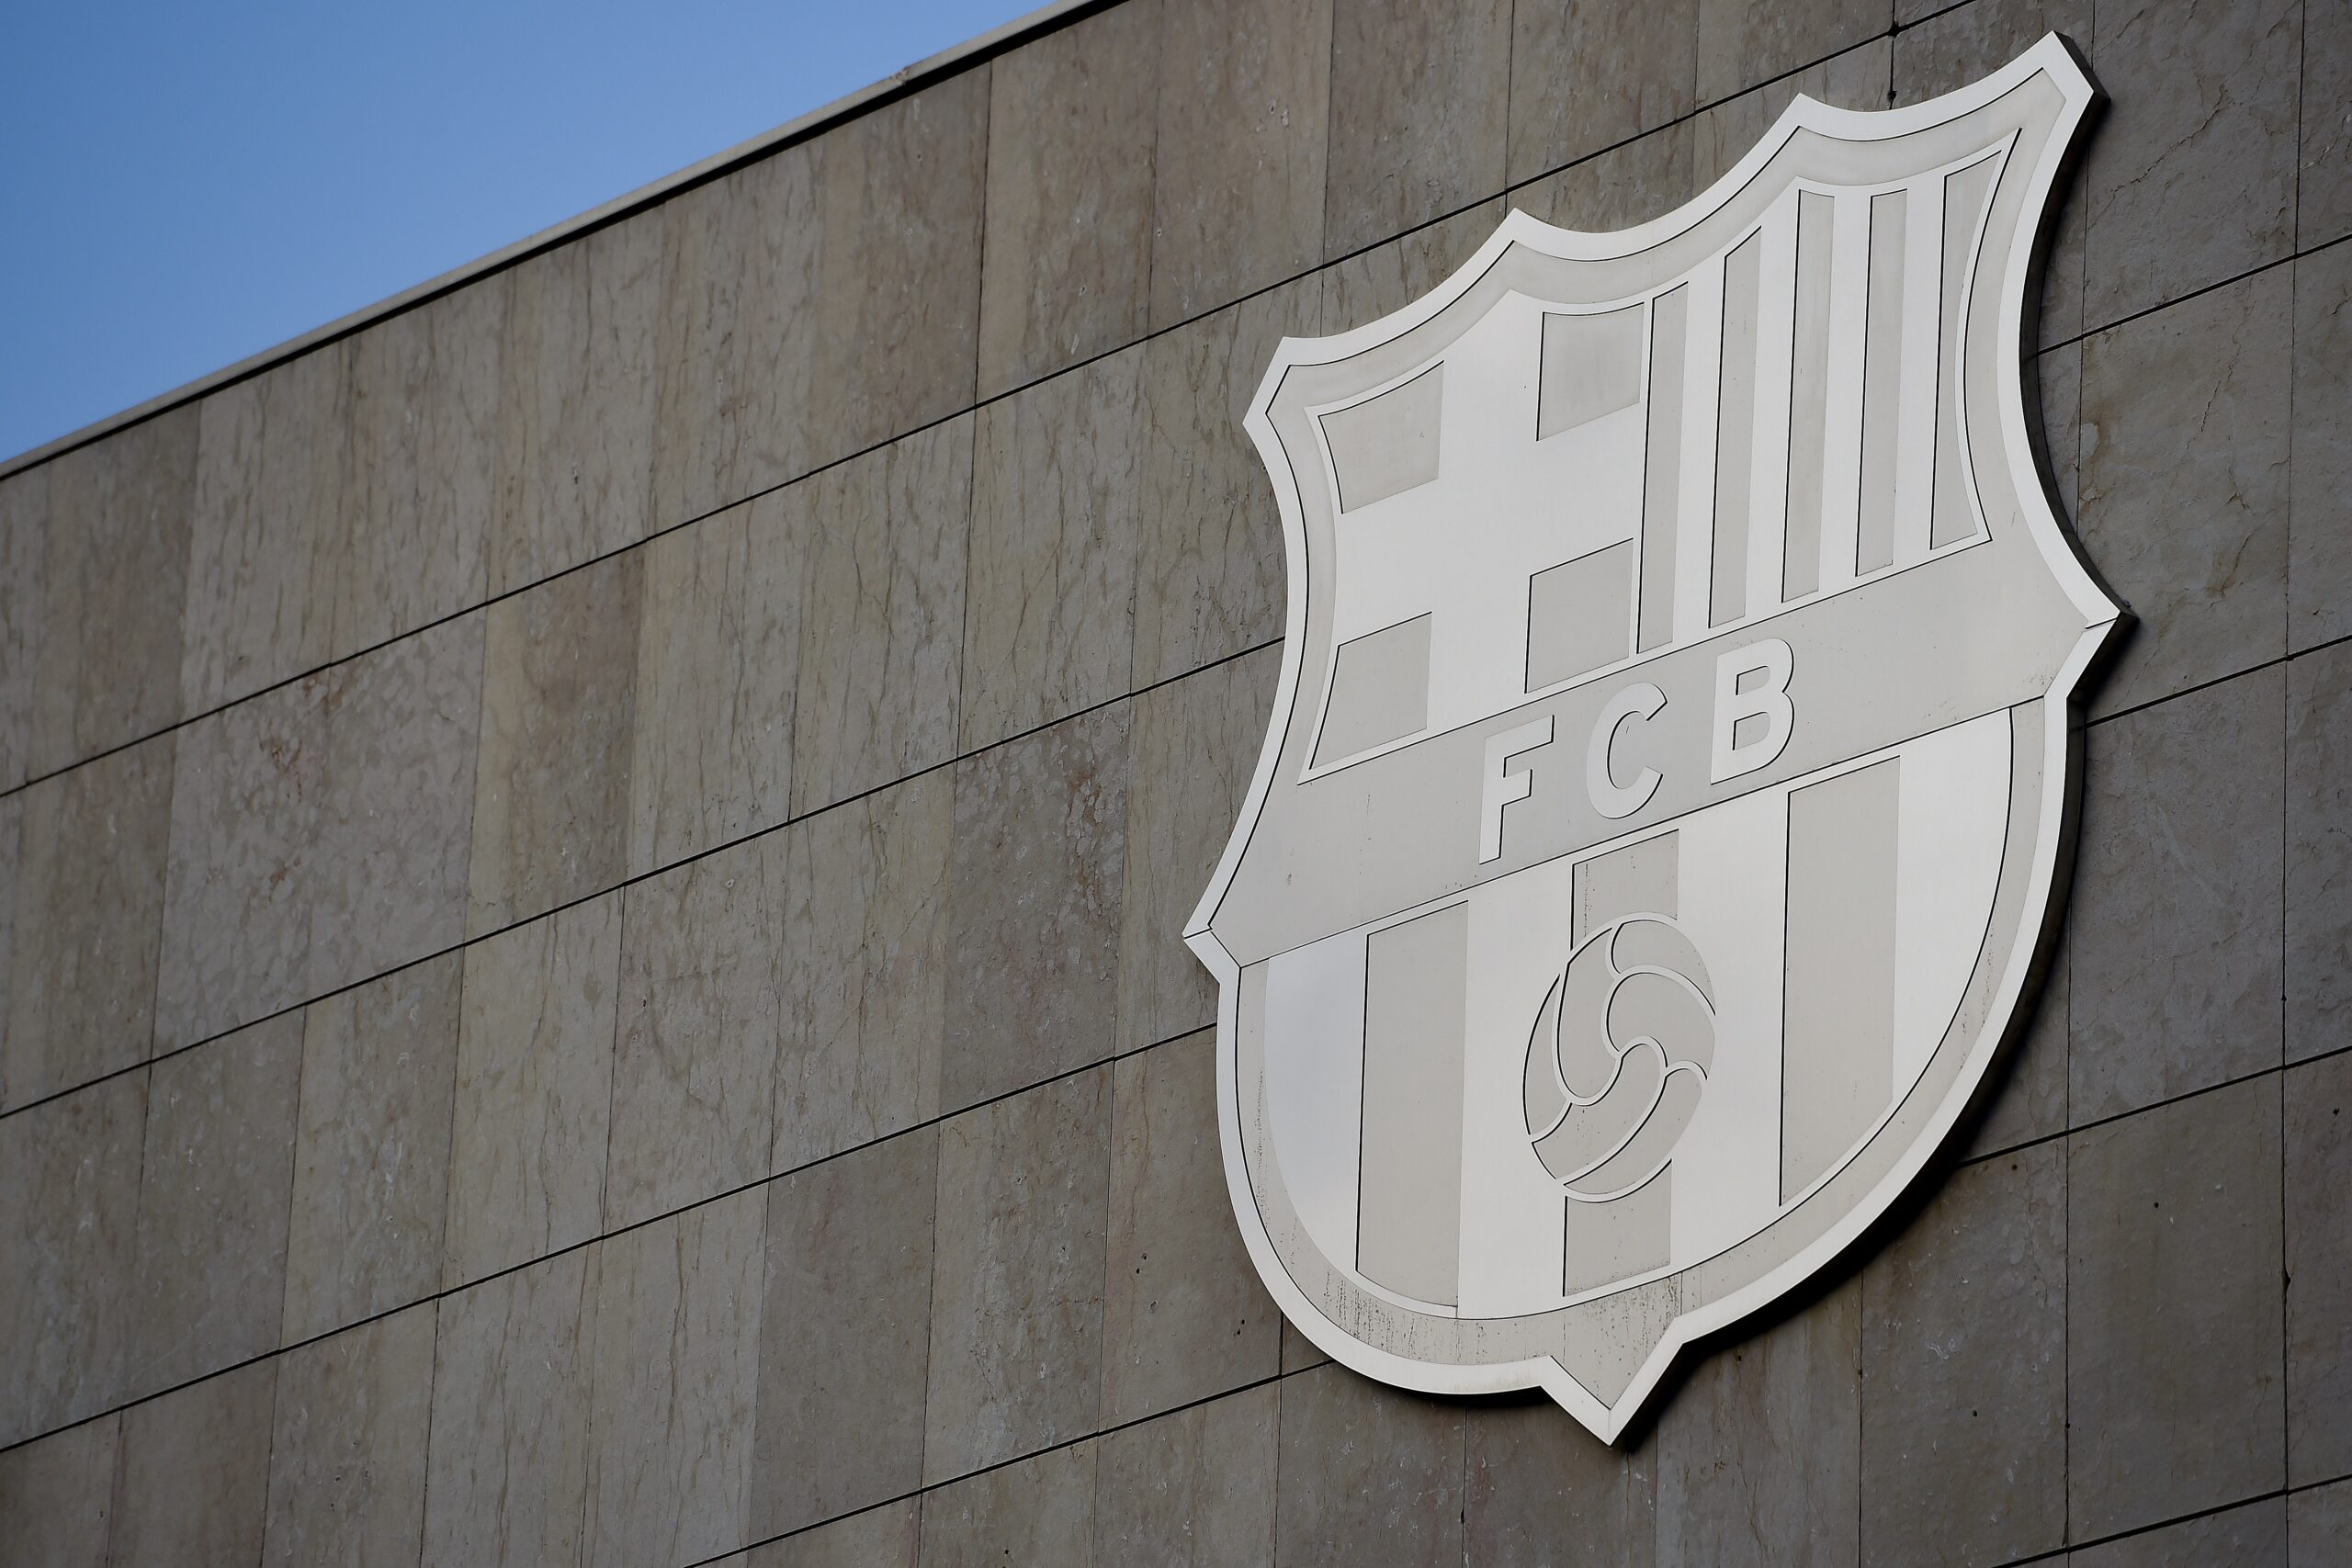 Picture shows FC Barcelona's badge displayed on a wall of the Camp Nou stadium in Barcelona on March 13, 2015.